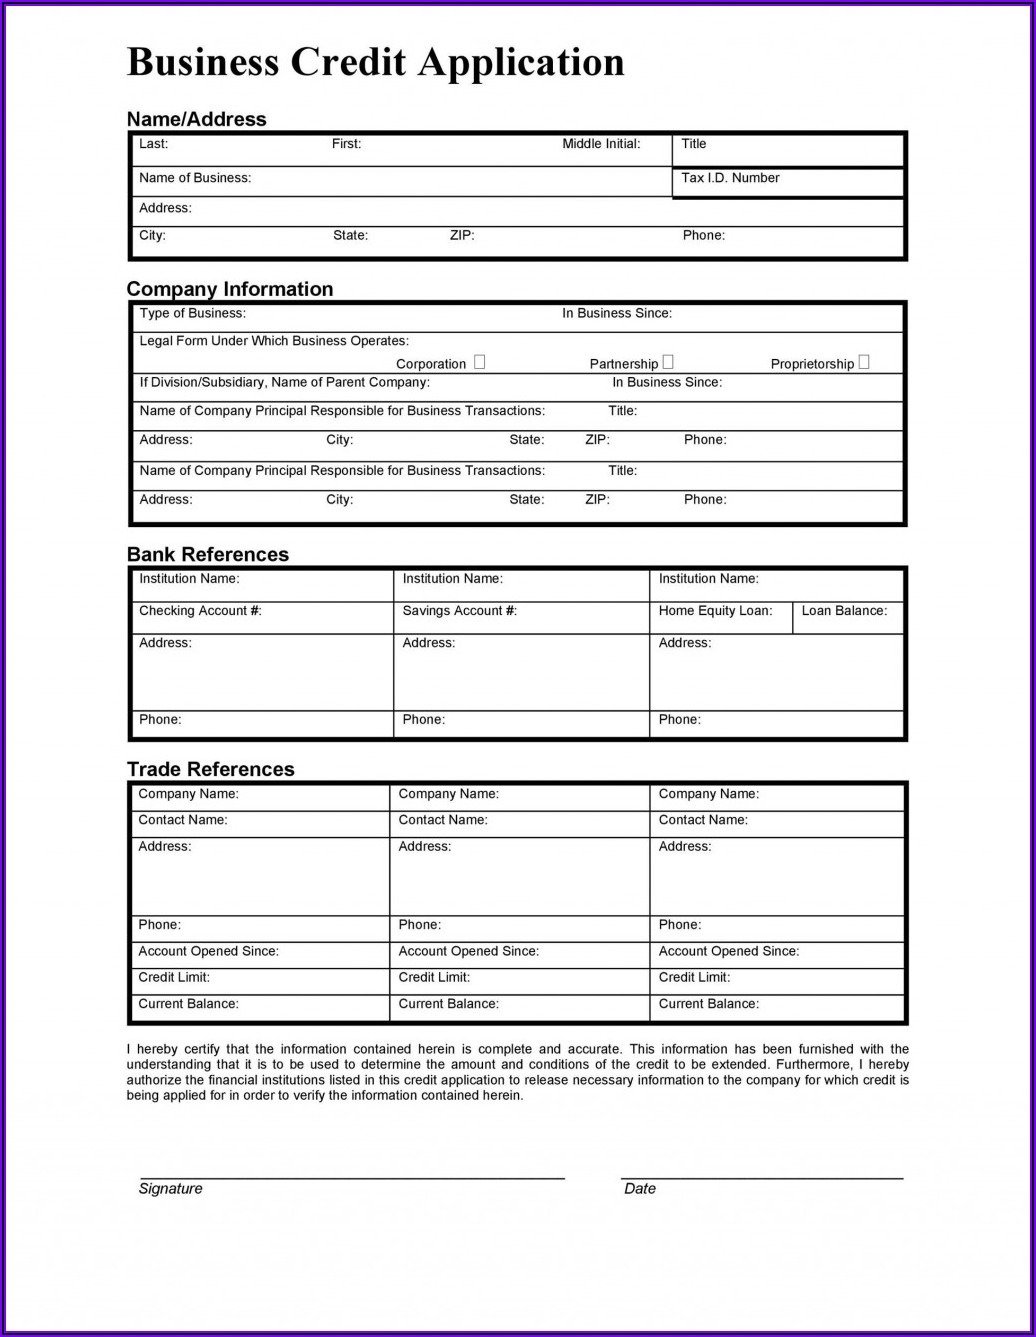 Business Credit Application Form Template Uk